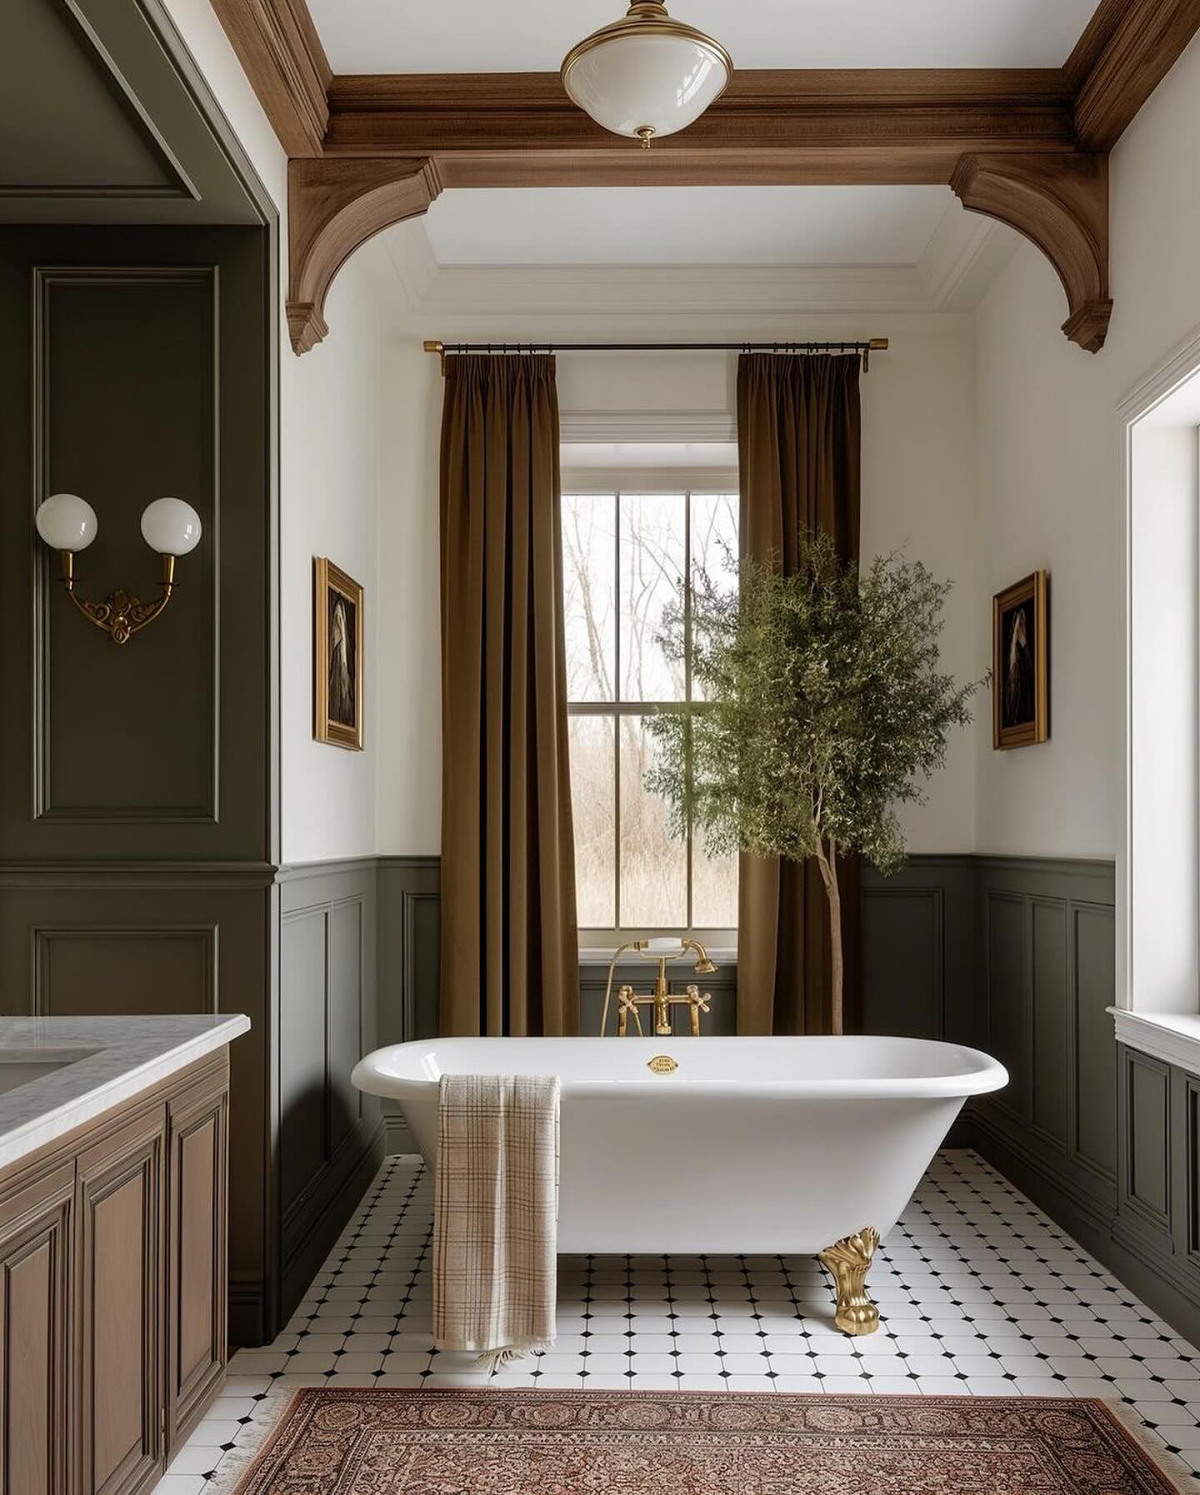 10 Clever Ways To Design An Aesthetic Bathroom